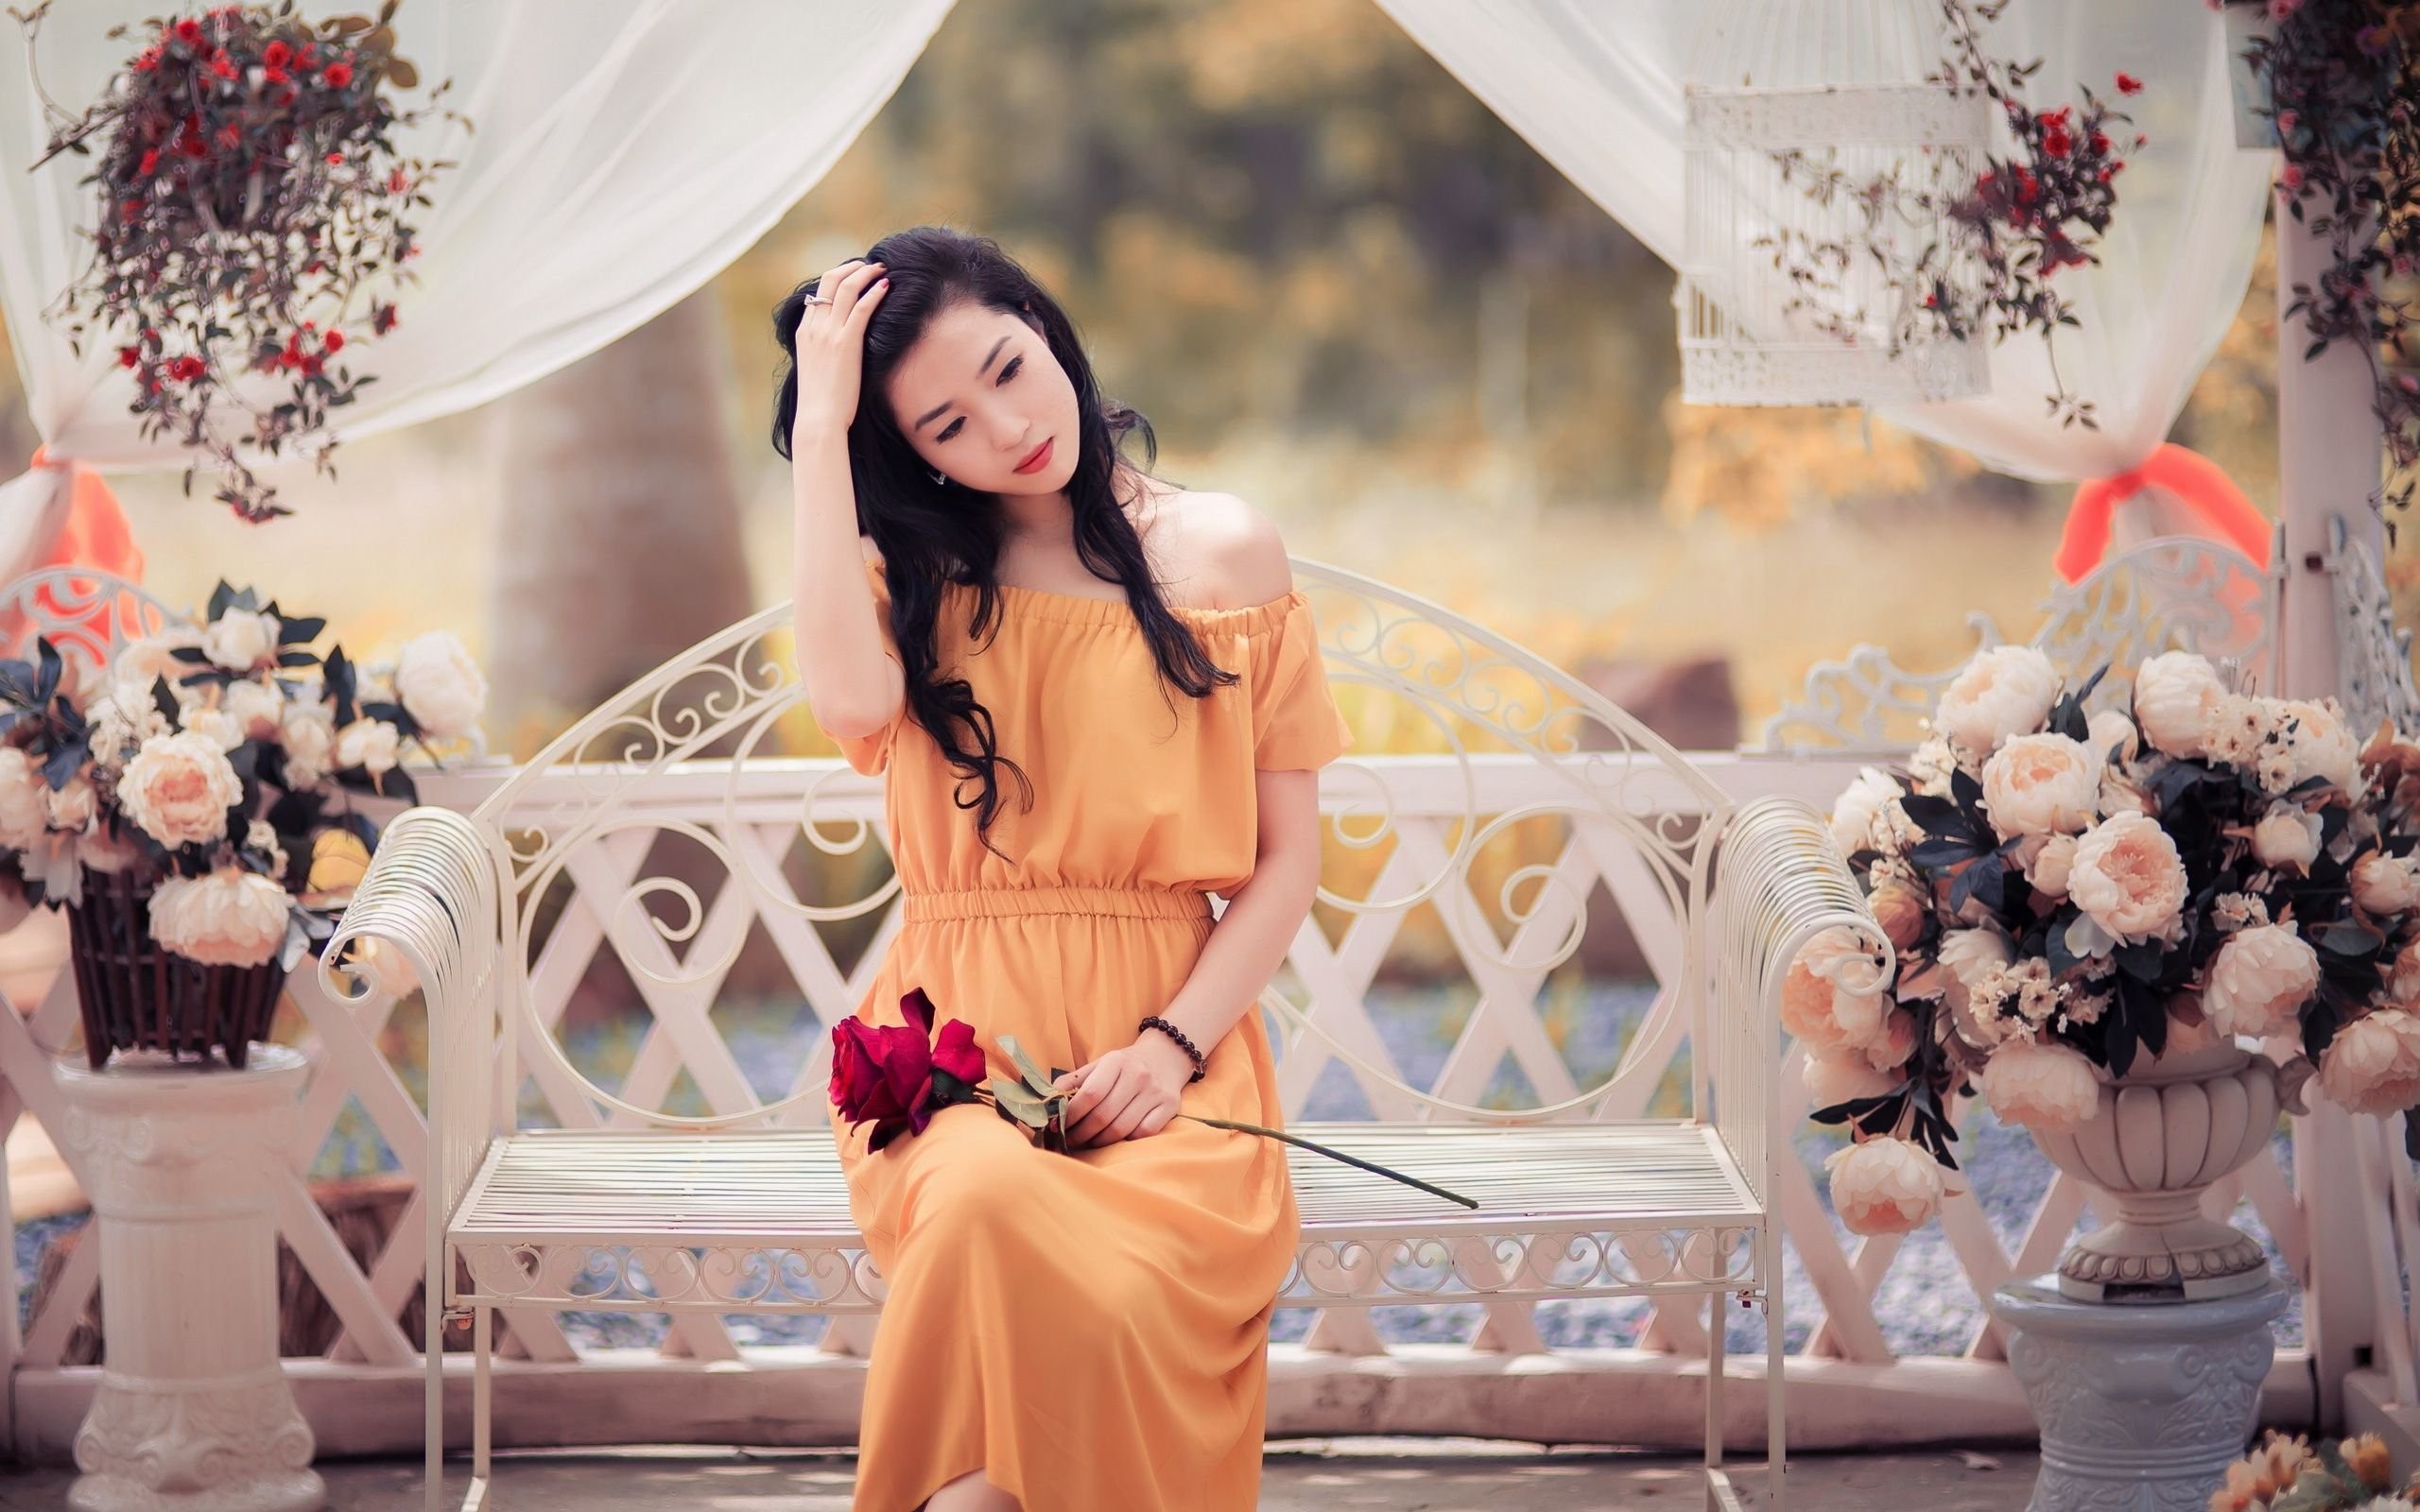 People 2560x1600 women model brunette long hair women outdoors nature trees Asian orange dress sitting flowers bench rose hands in hair red lipstick curtains